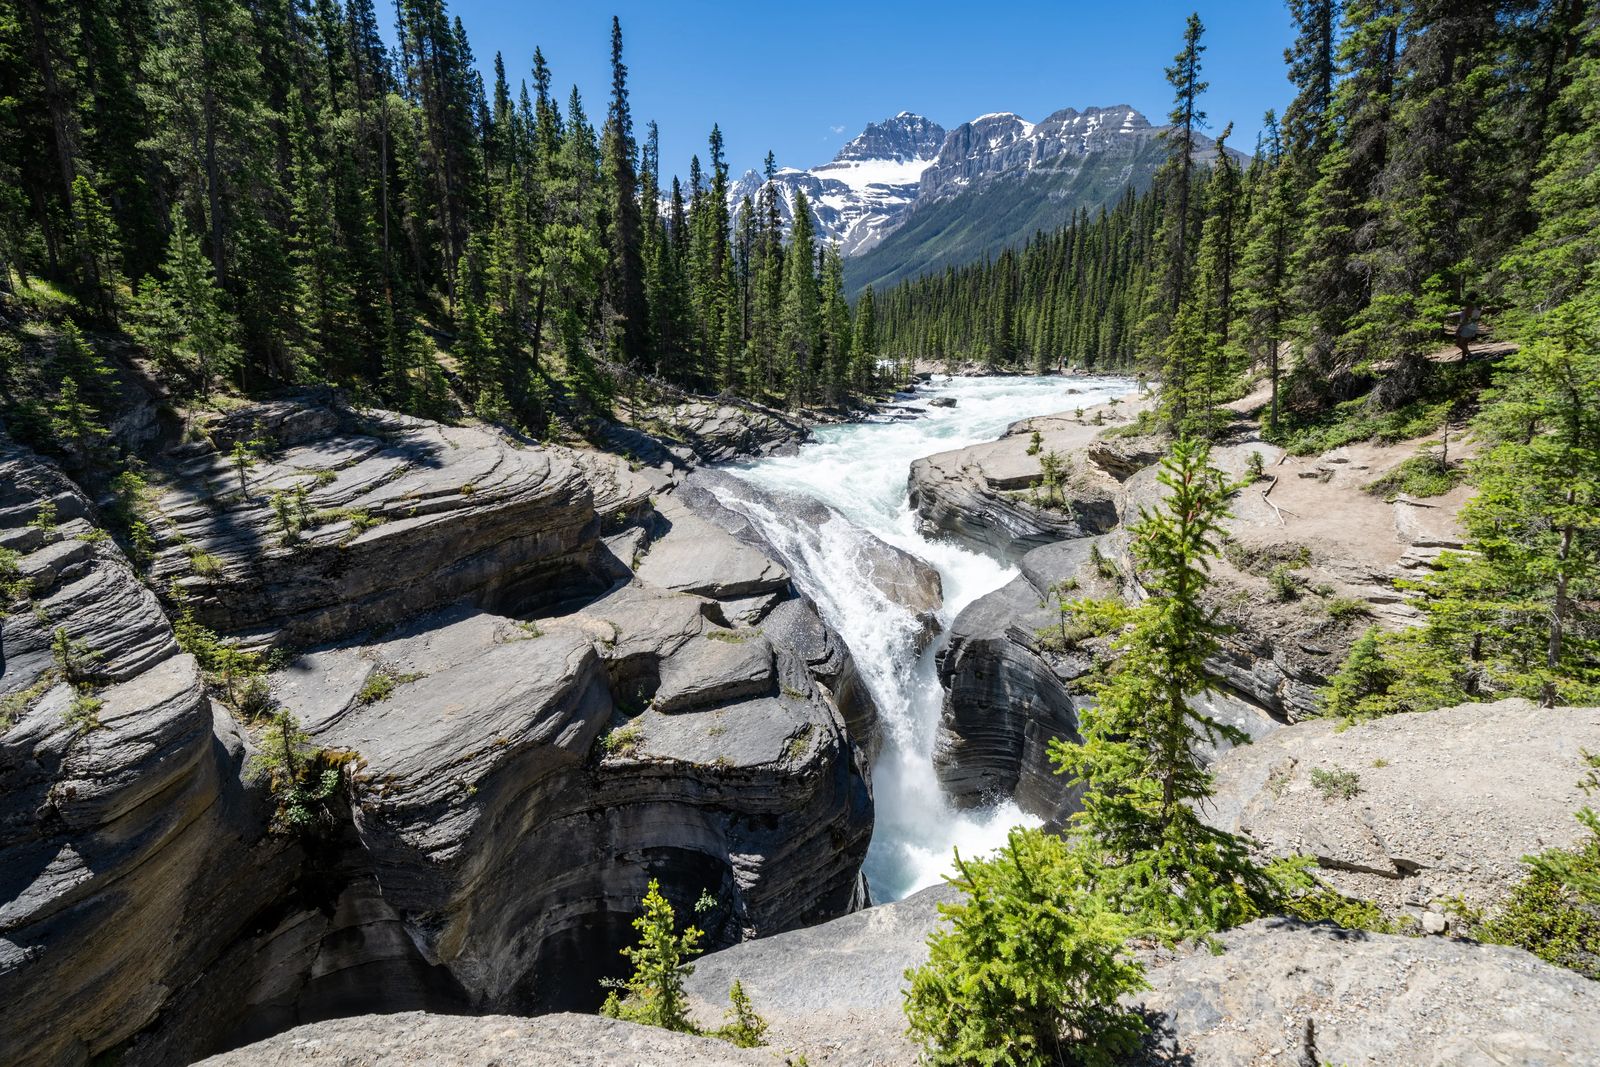 river cutting through mistaya canyon - The BEST of the Icefields Parkway Banff